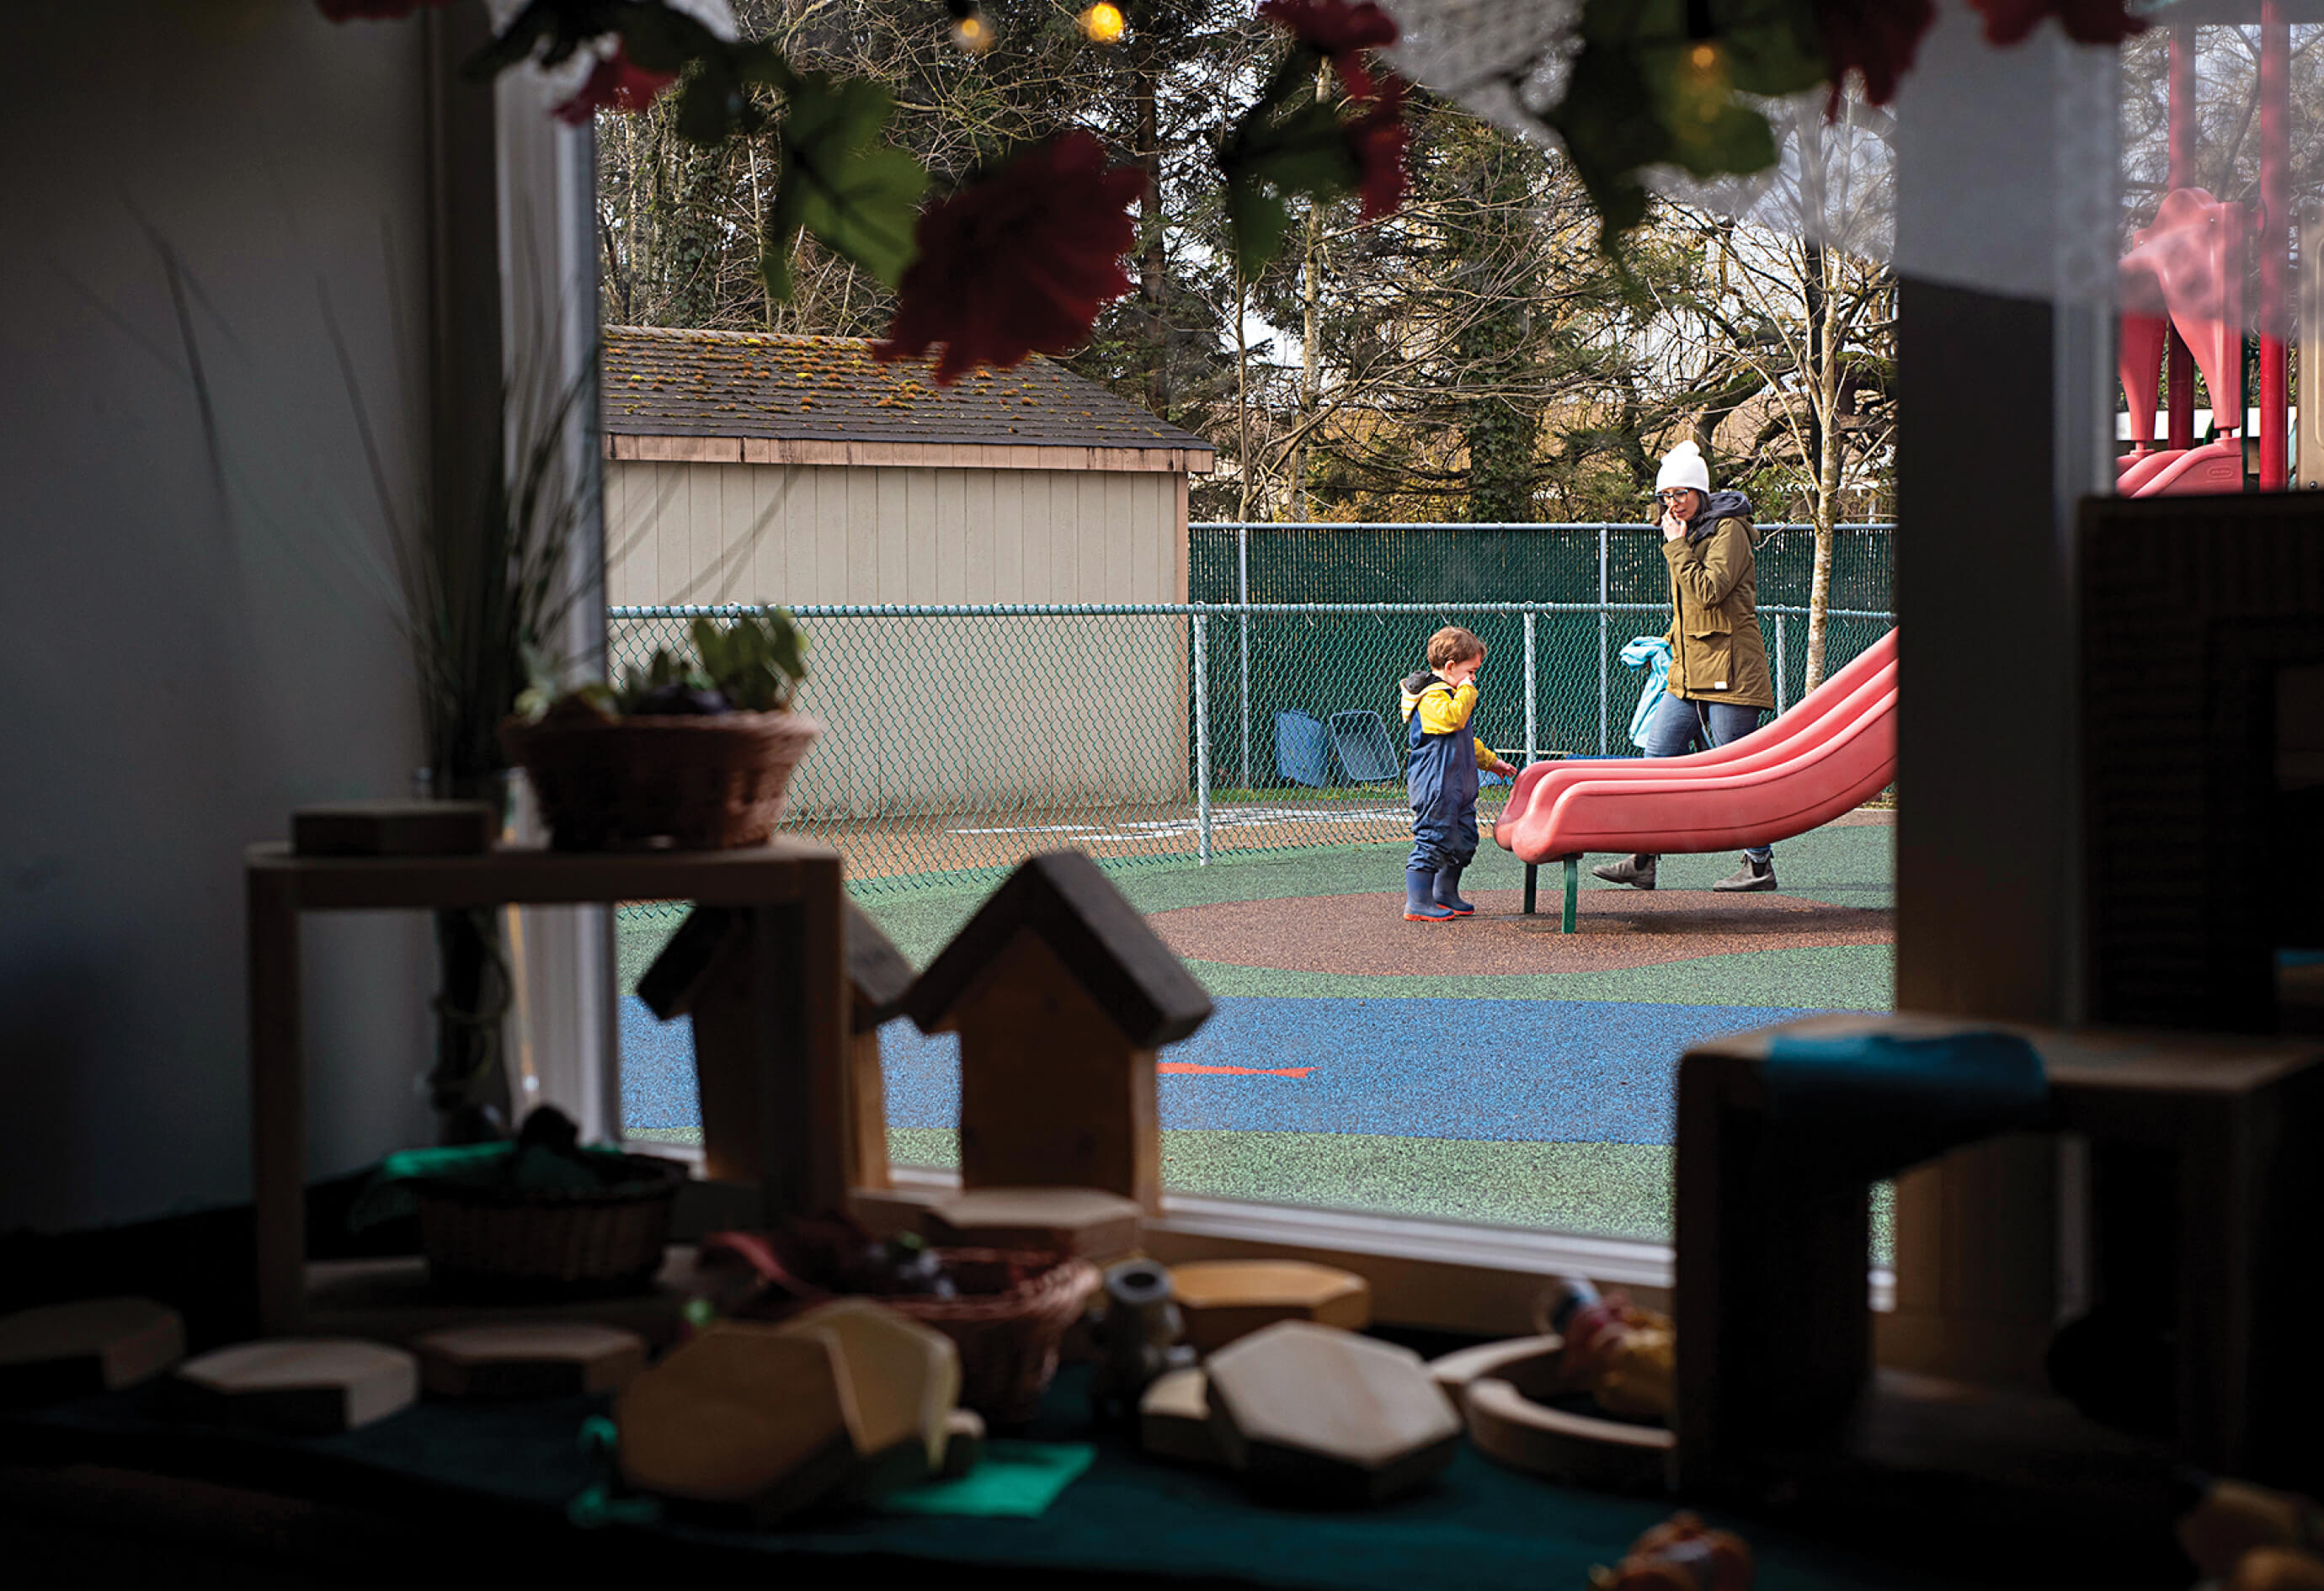 Early Childhood Educator Monique Belanger plays with a child in the playground at A:lmélháwtxw. (Photo: Emma Arkell)